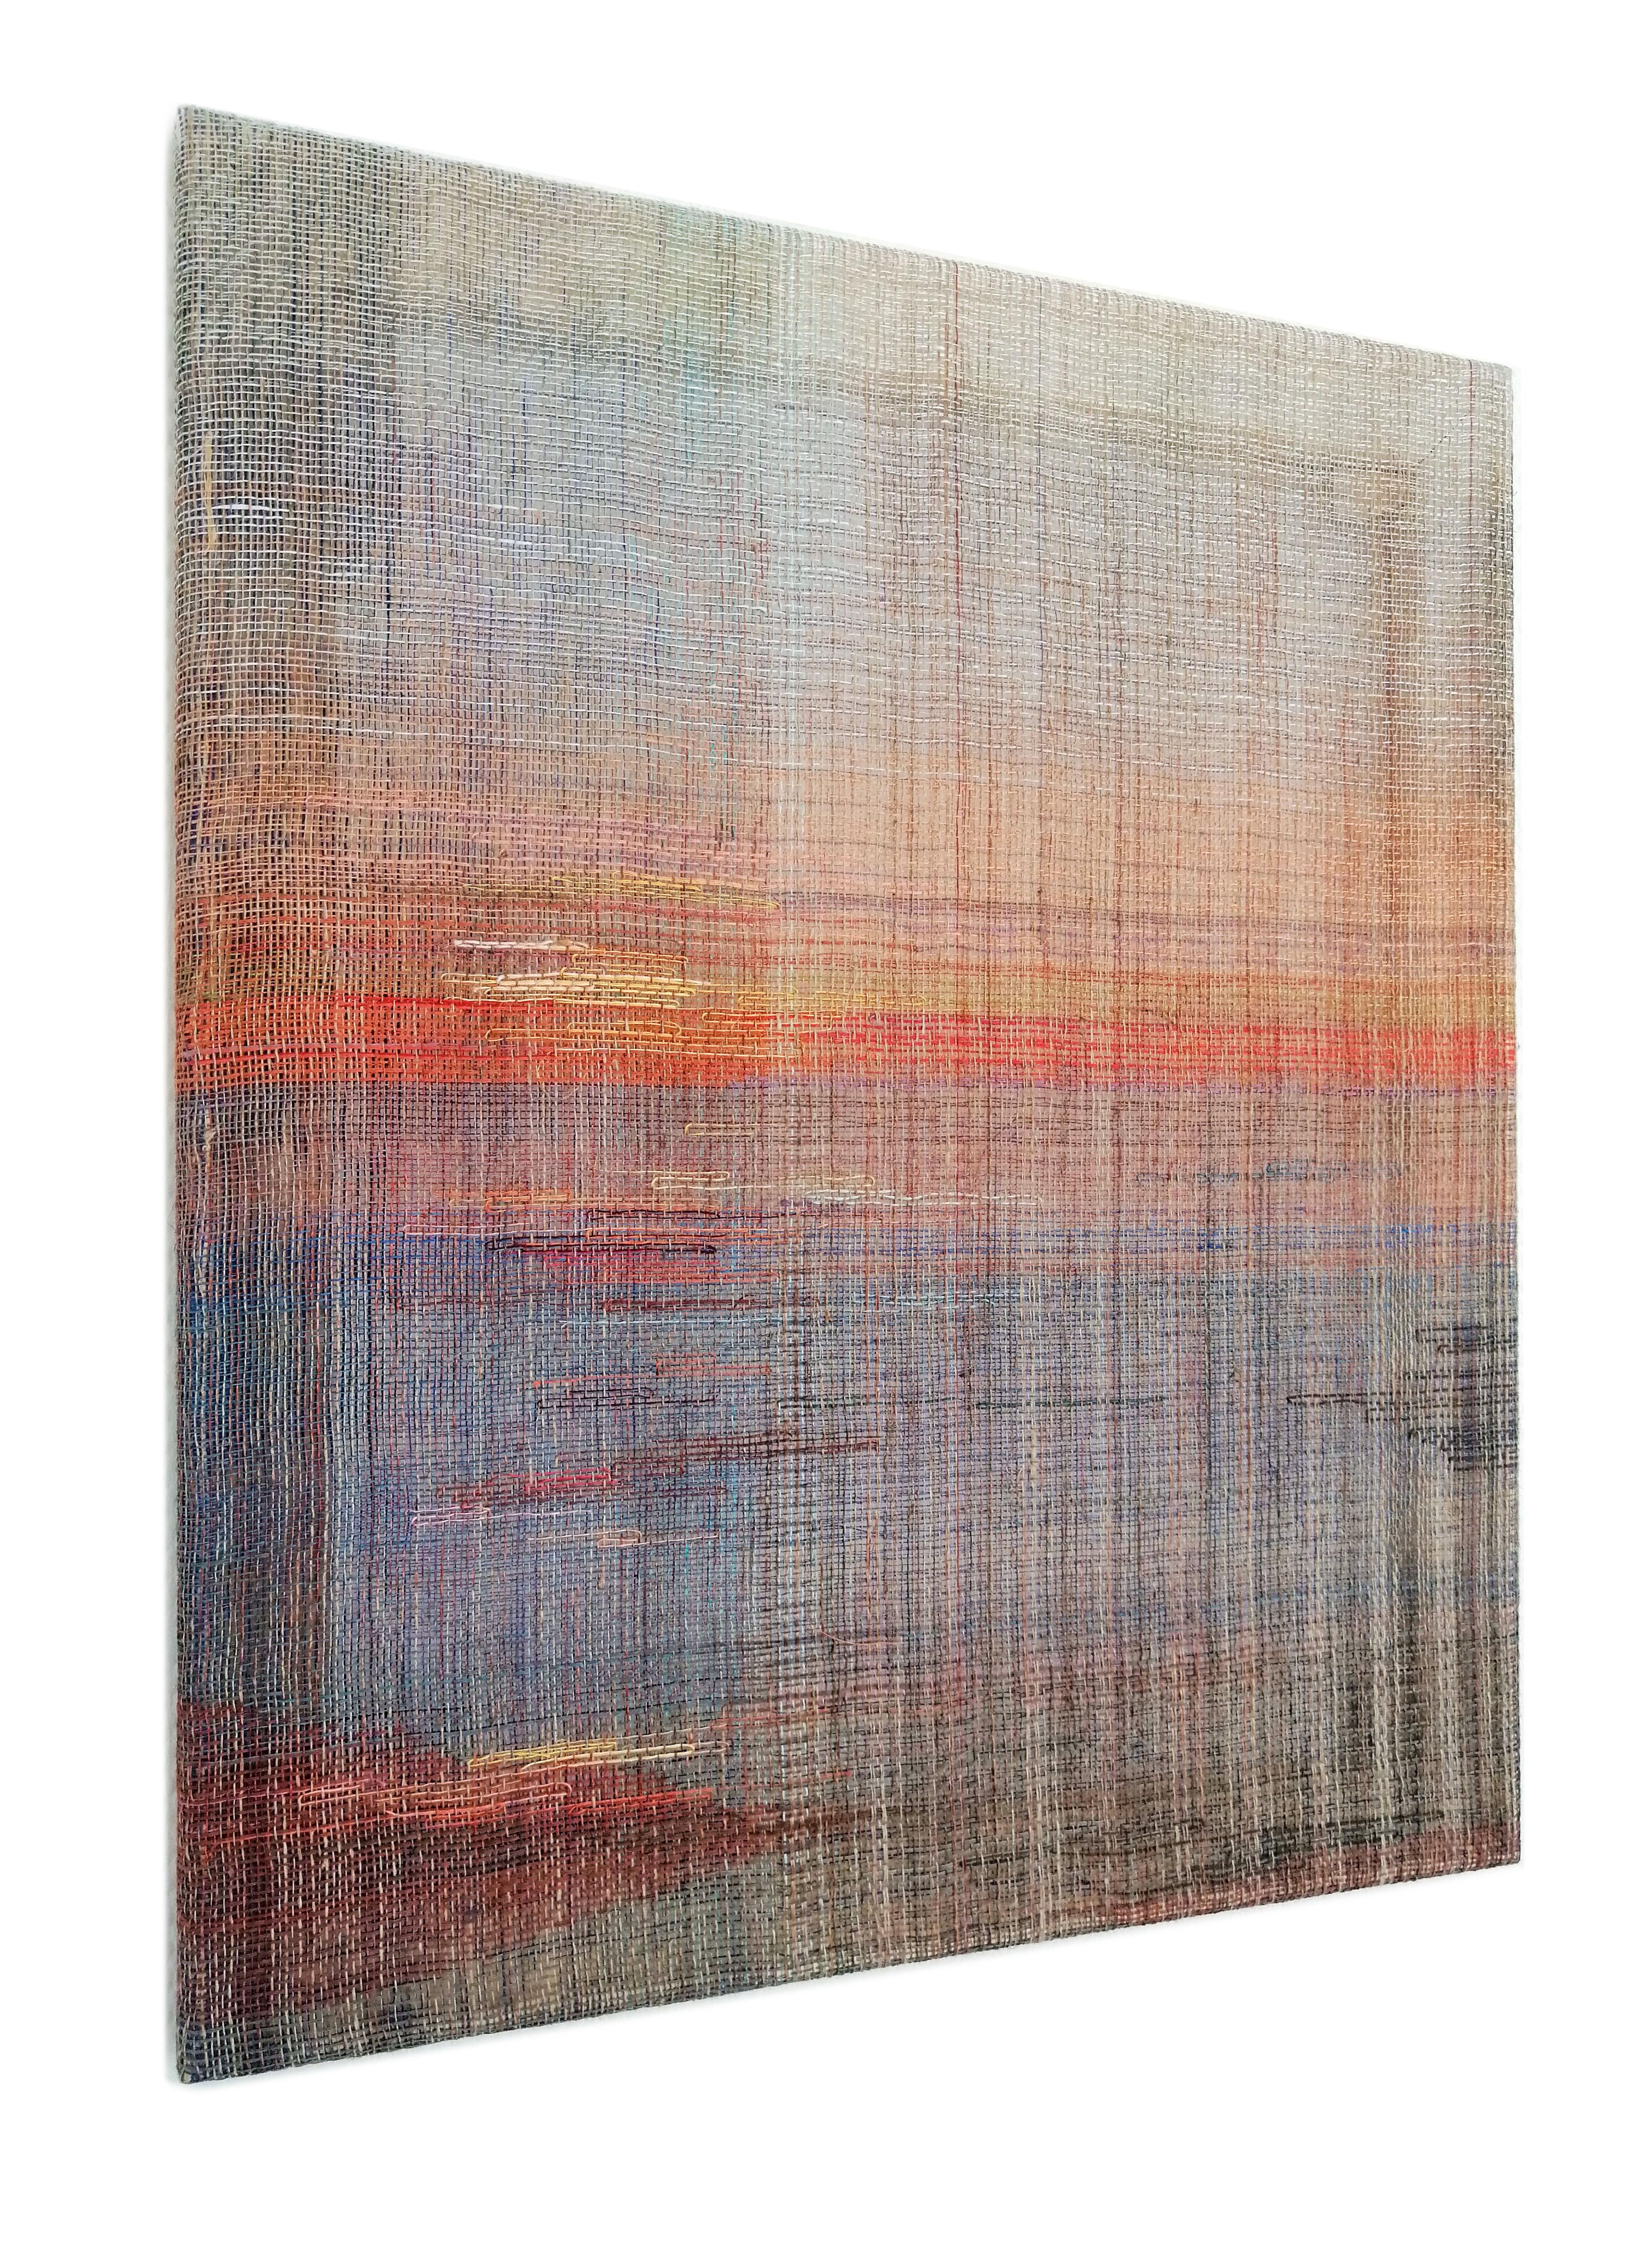 From the series Horizons – Sunset  2023
Handwoven painting, linen, cotton yarn, acrylic textile paint, 65 x 50 cm.

‘Horizons’ are a symbiosis of two disciplines of art, Painting and Weaving. Handwoven Canvas is entirely constructed on a weaving